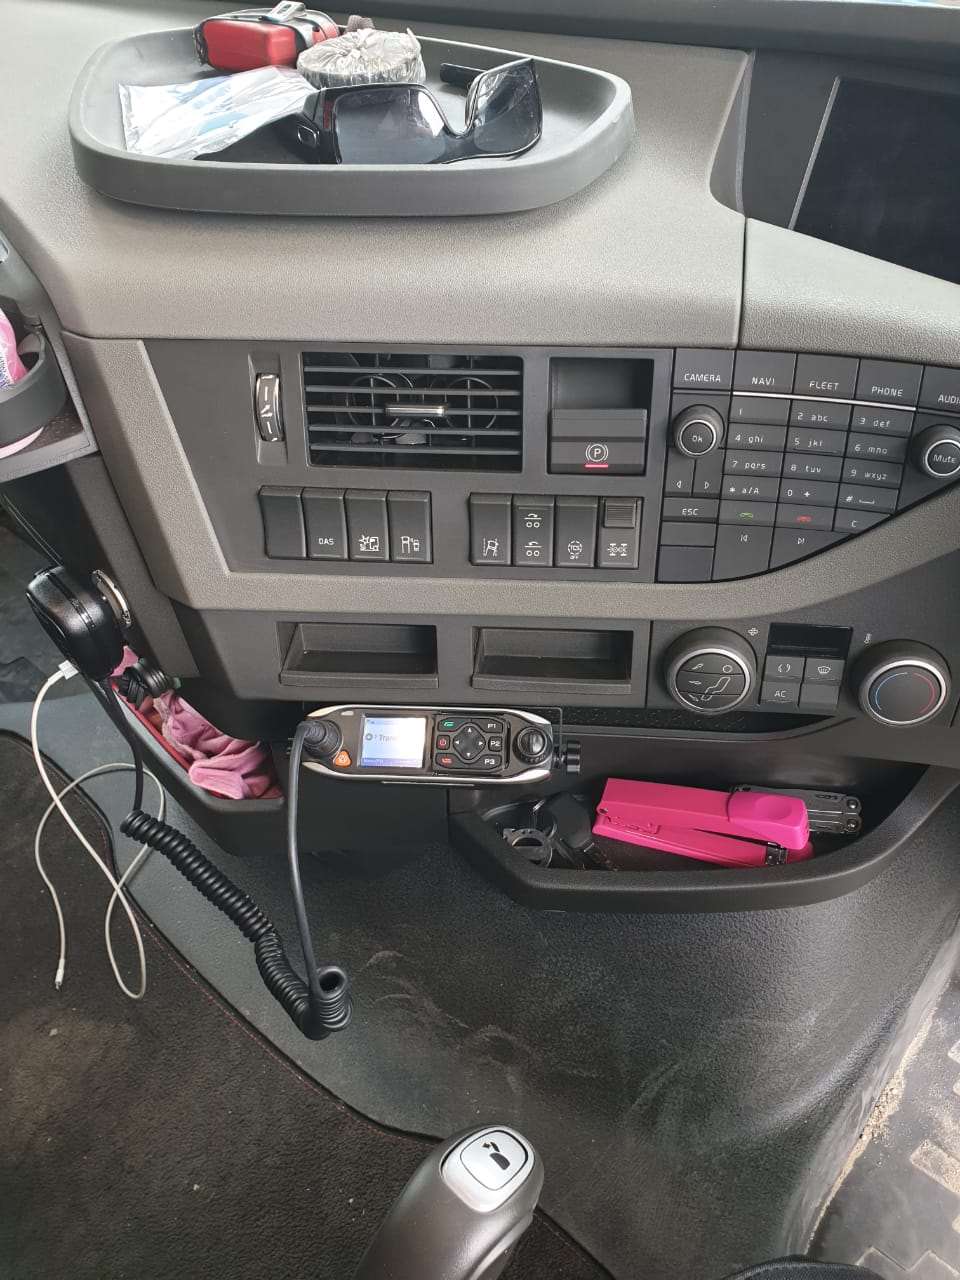 iTalk450 ptt-radio fitted into a Volvo truck